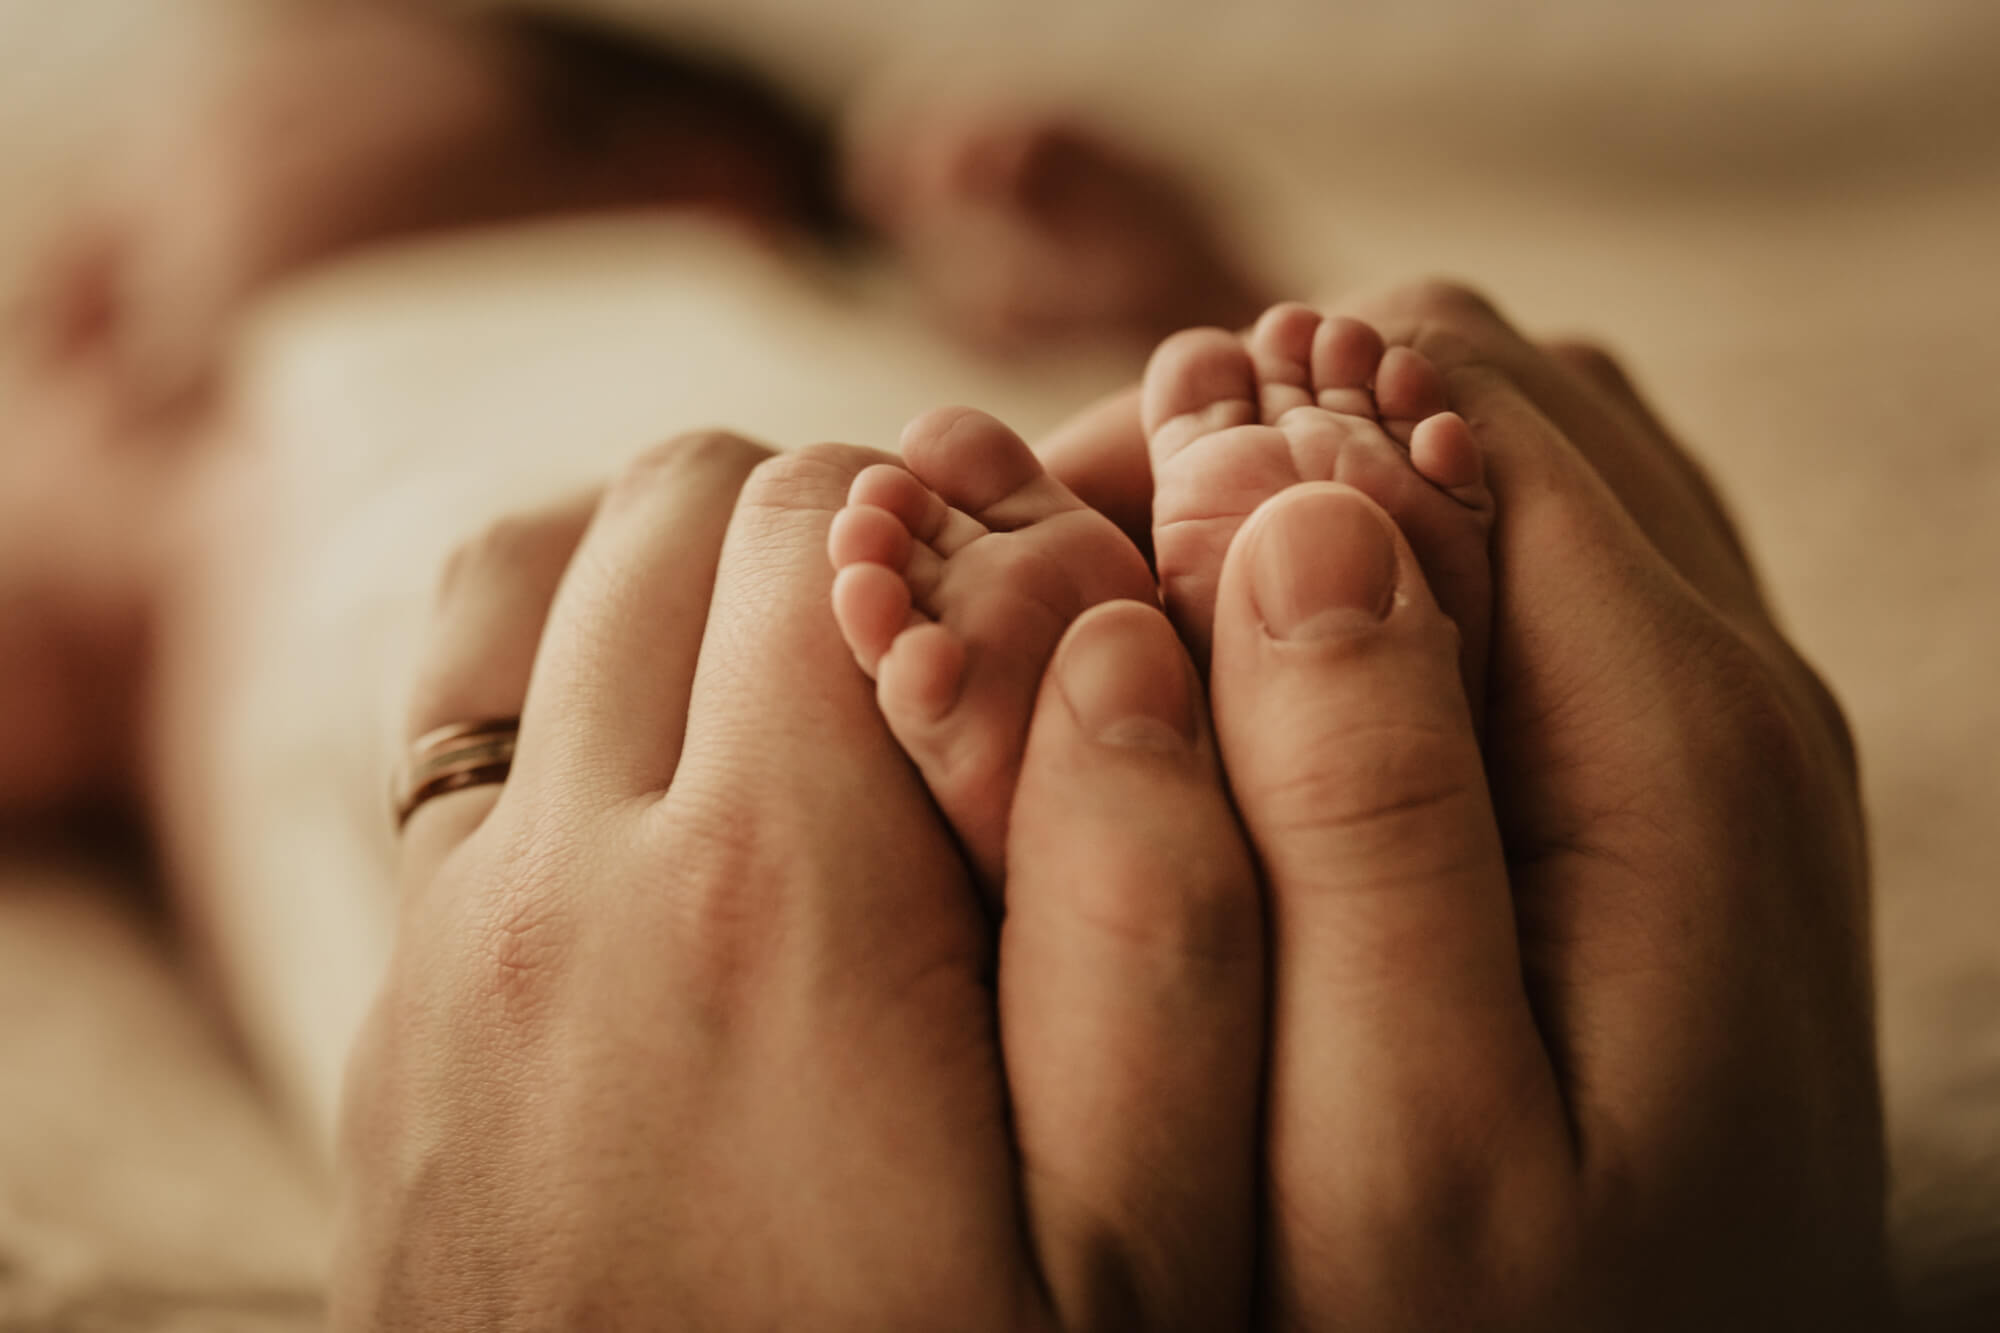 Details of a father holding his newborn baby's feet while they sleep beautifully connected